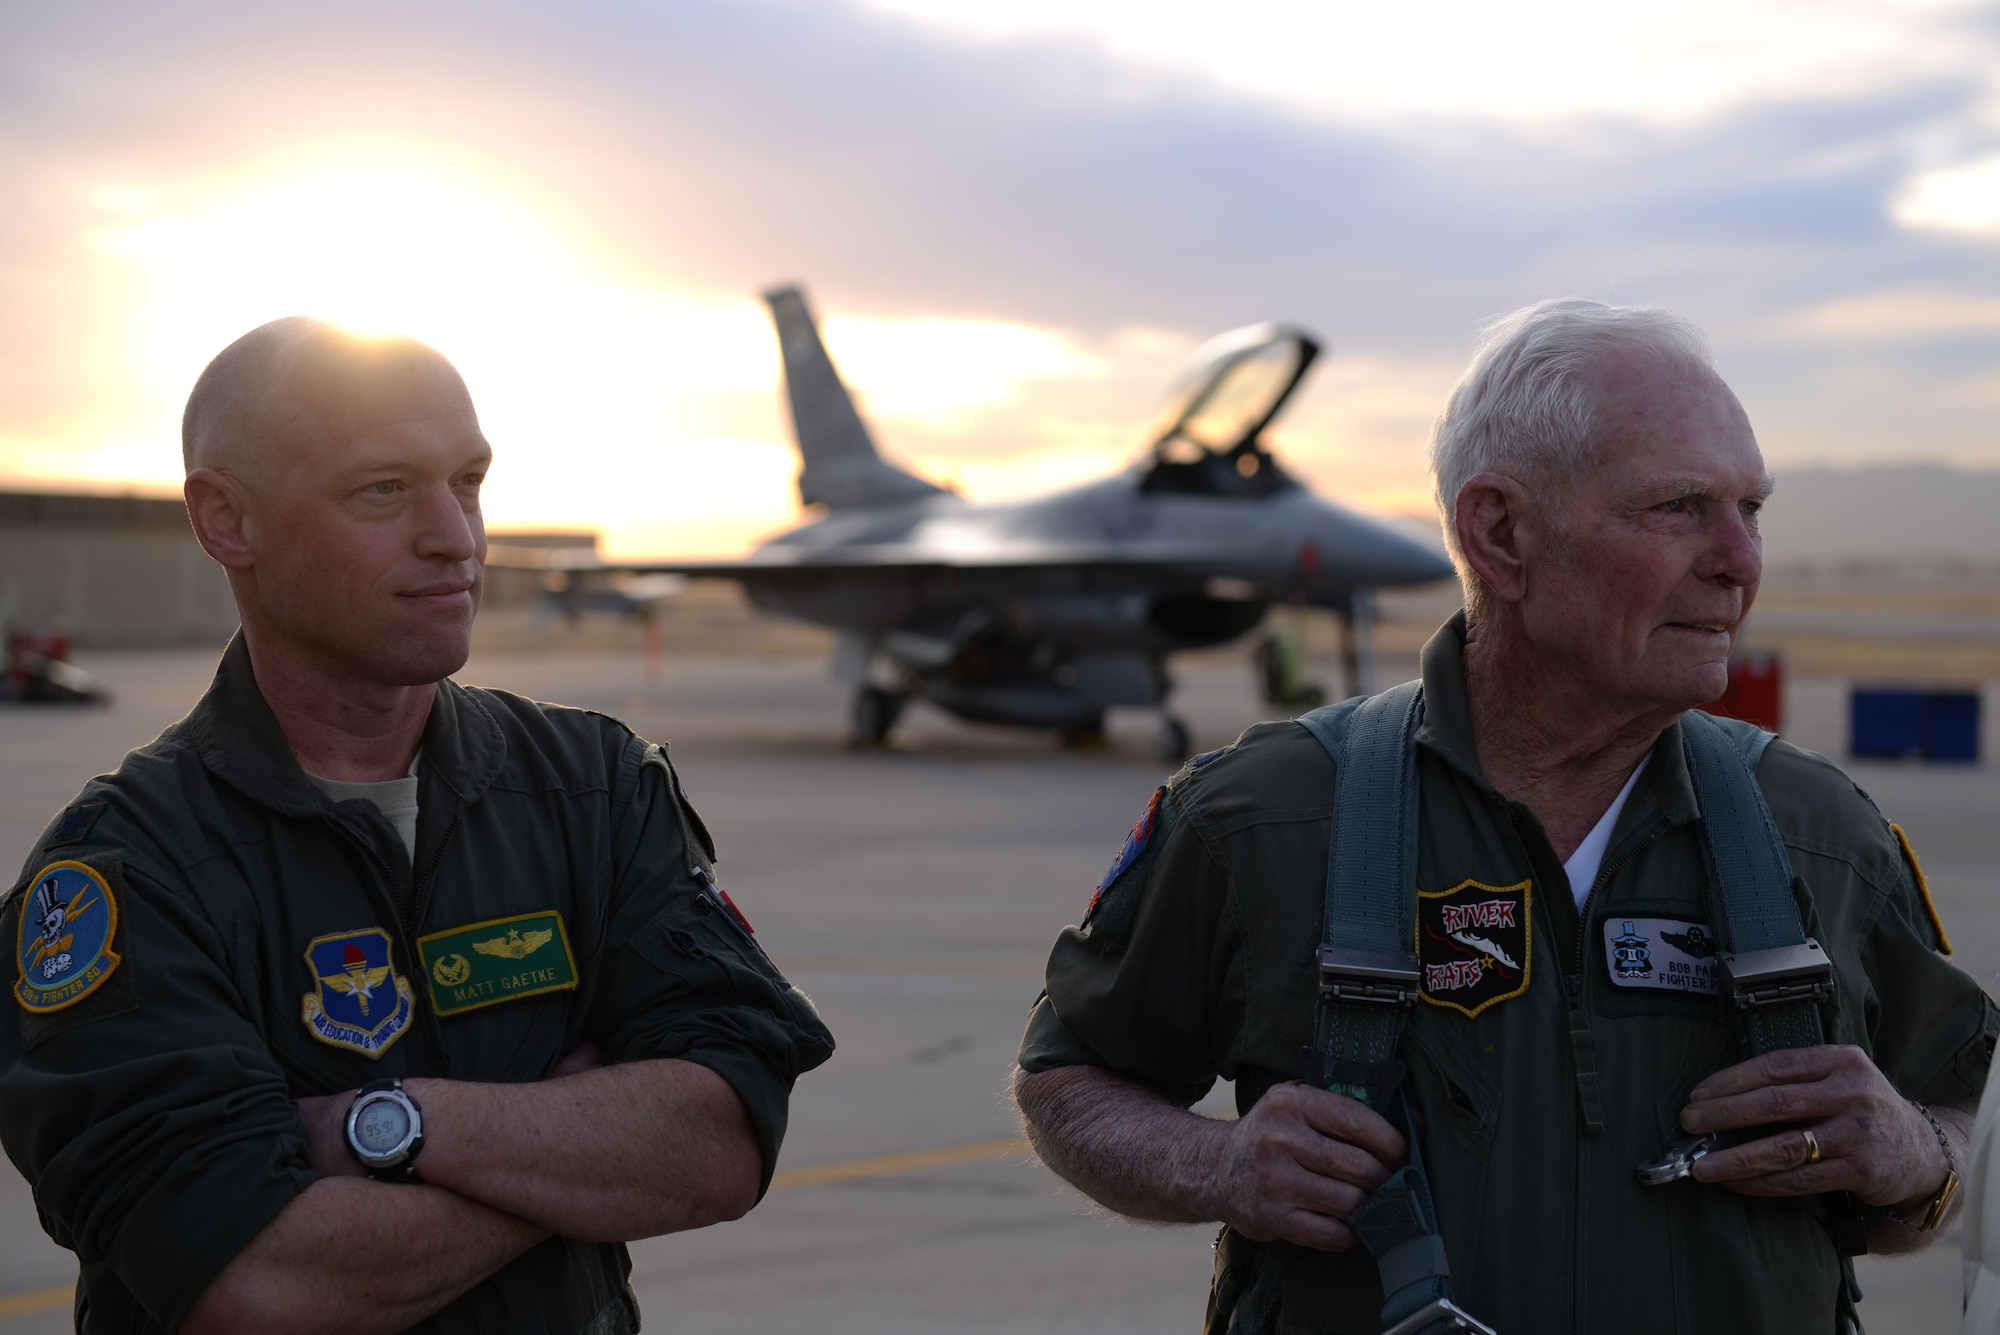 Lt. Col. Matthew Gaetke, 310th Fighter Squadron commander, and retired Air Force pilot Lt. Col. Bob Pardo, watch as an F-16 Fighting Falcons take off at Luke Air Force Base, Ariz., Dec. 12, 2017. Pardo visited Luke to speak at the graduation of the latest 310th FS F-16 Basic Course class. (U.S. Air Force photo/Senior Airman Ridge Shan)